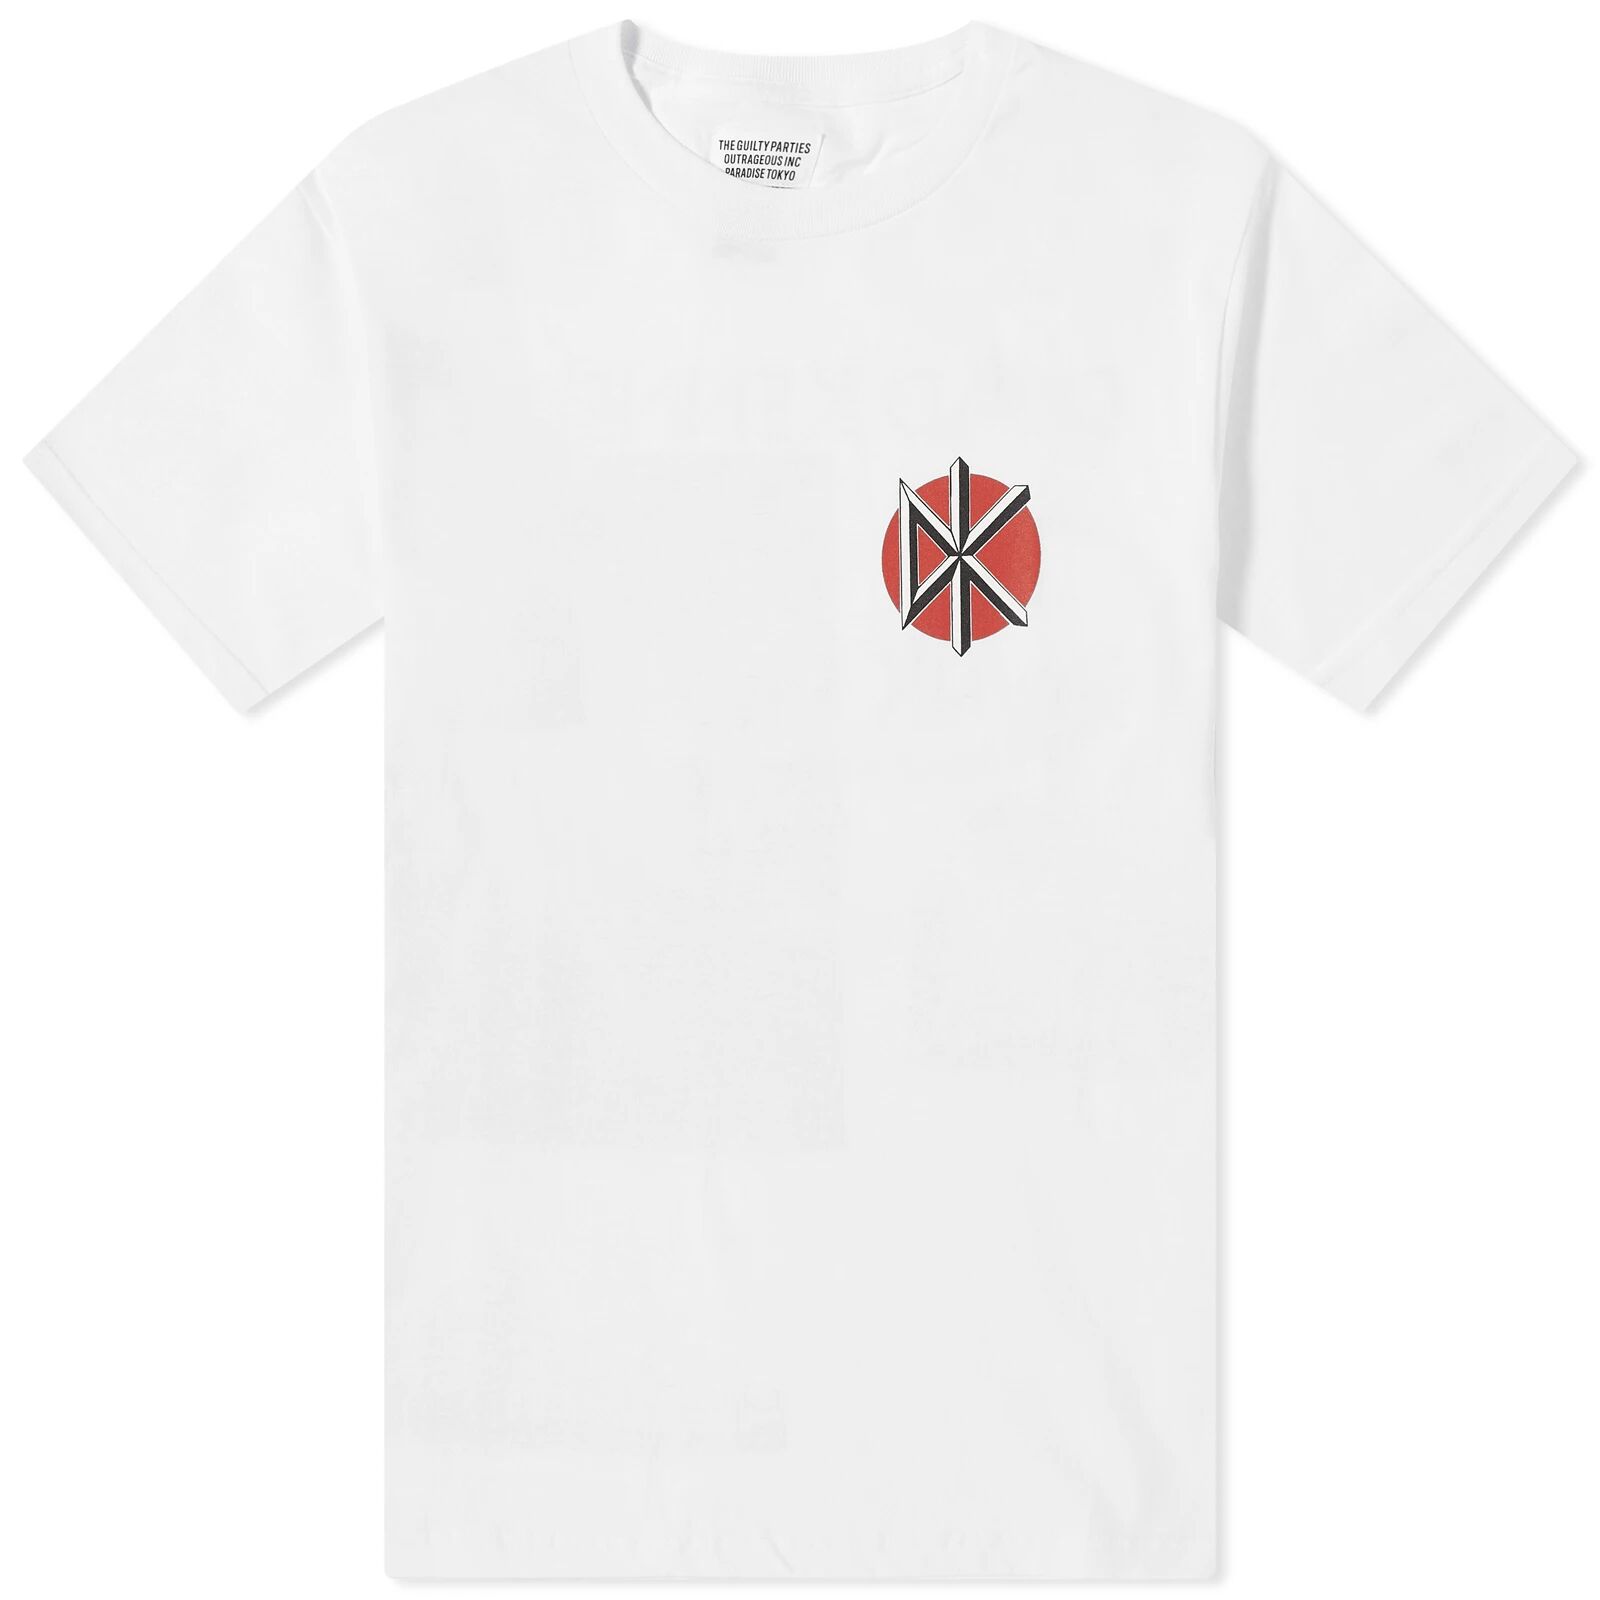 Wacko Maria Men's Dead Kennedys Crew Neck T-Shirt in White, Size X-Large